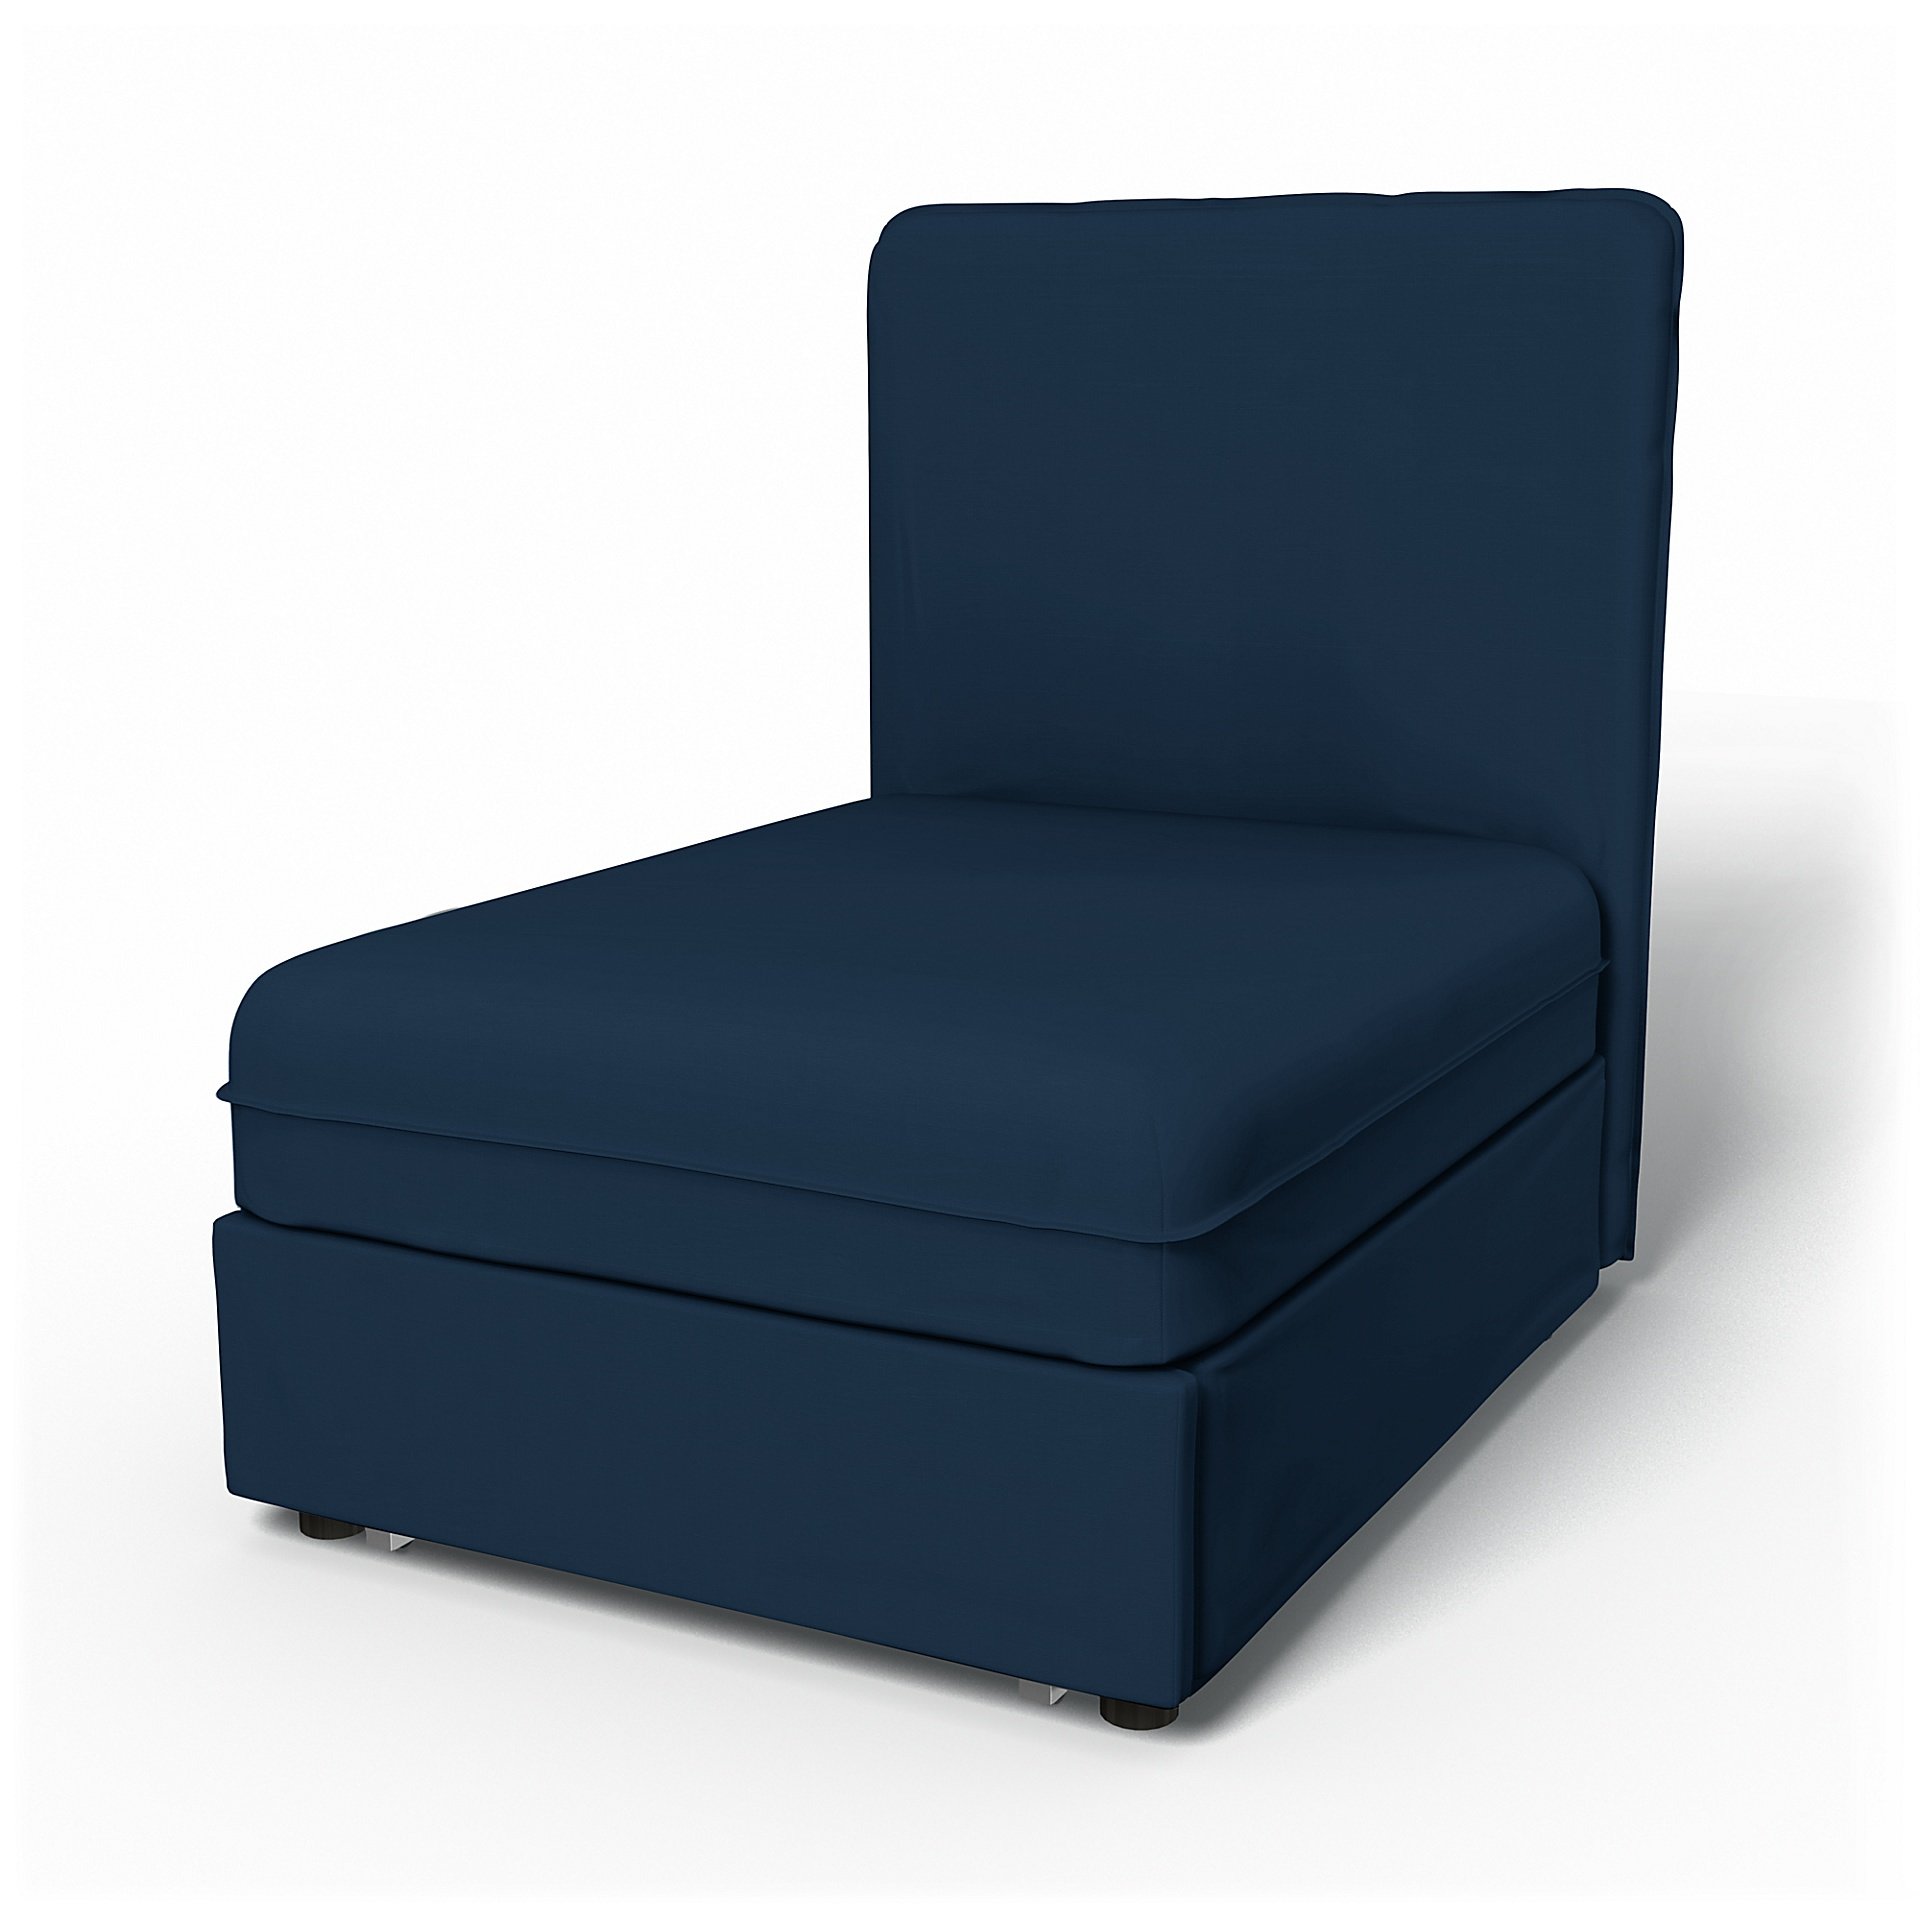 IKEA - Vallentuna Seat Module with High Back Sofa Bed Cover (80x100x46cm), Deep Navy Blue, Cotton - 